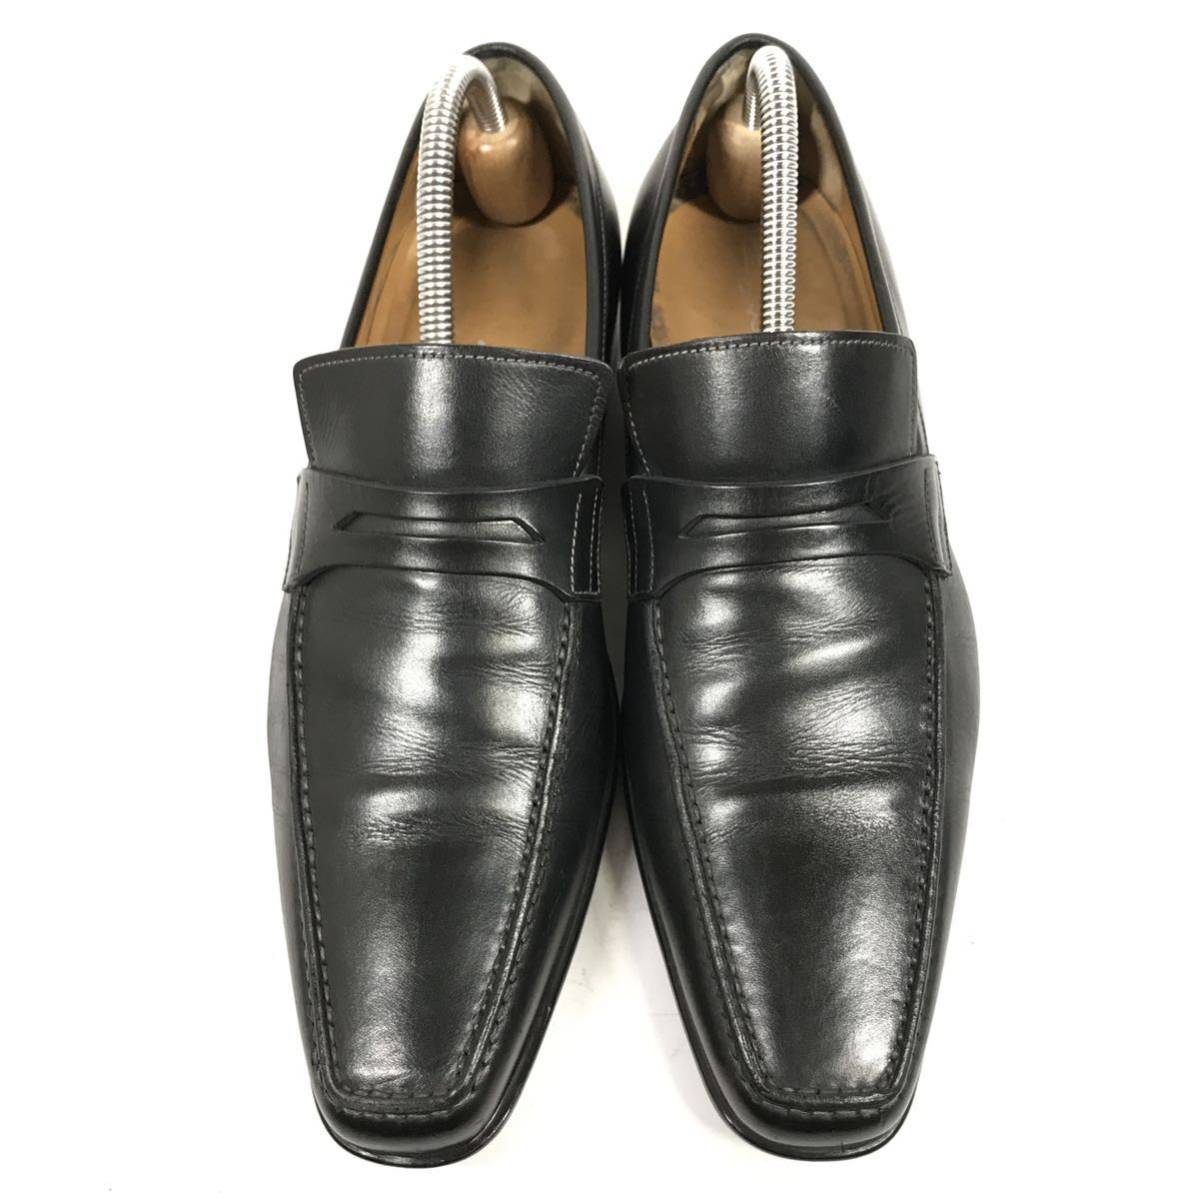 [ sun to-ni] genuine article Santoni shoes 24.5cm black Loafer slip-on shoes business shoes original leather for man men's Italy made 5 1/2 F